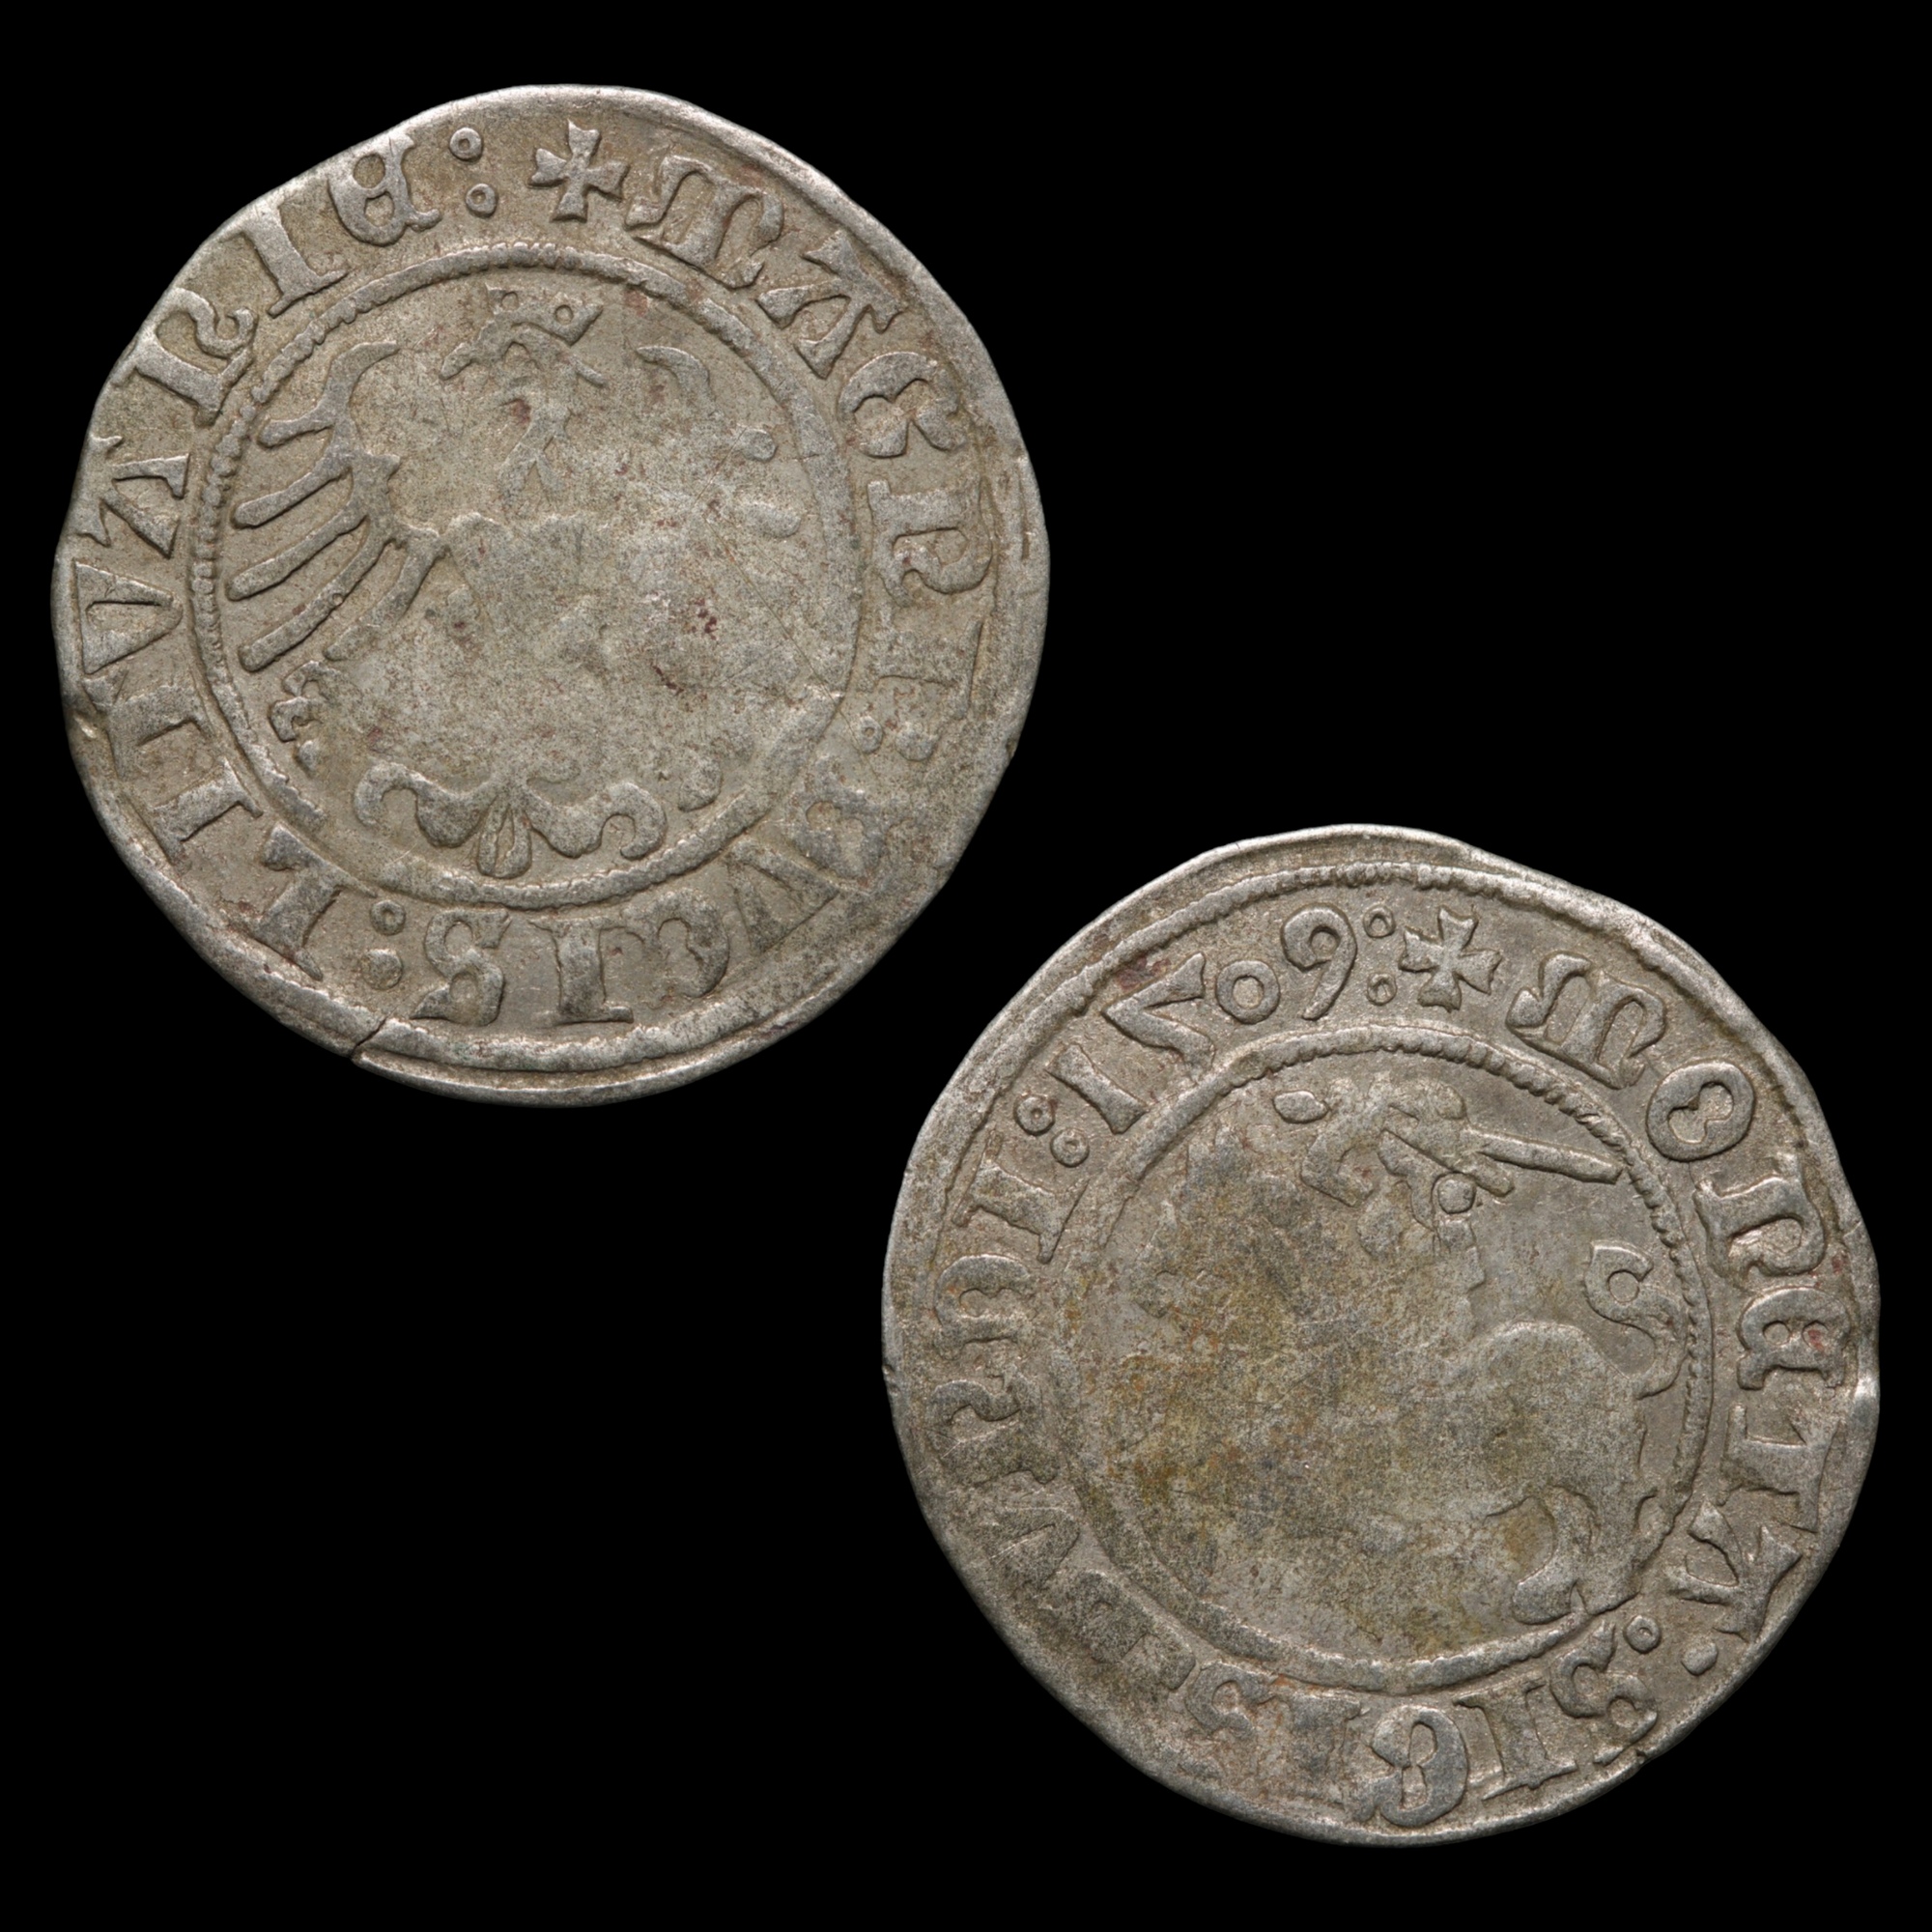 Grand Duchy of Lithuania, Sigismund I, Half Groat  - 1509 CE - Eastern Europe - 10/19/23 Auction